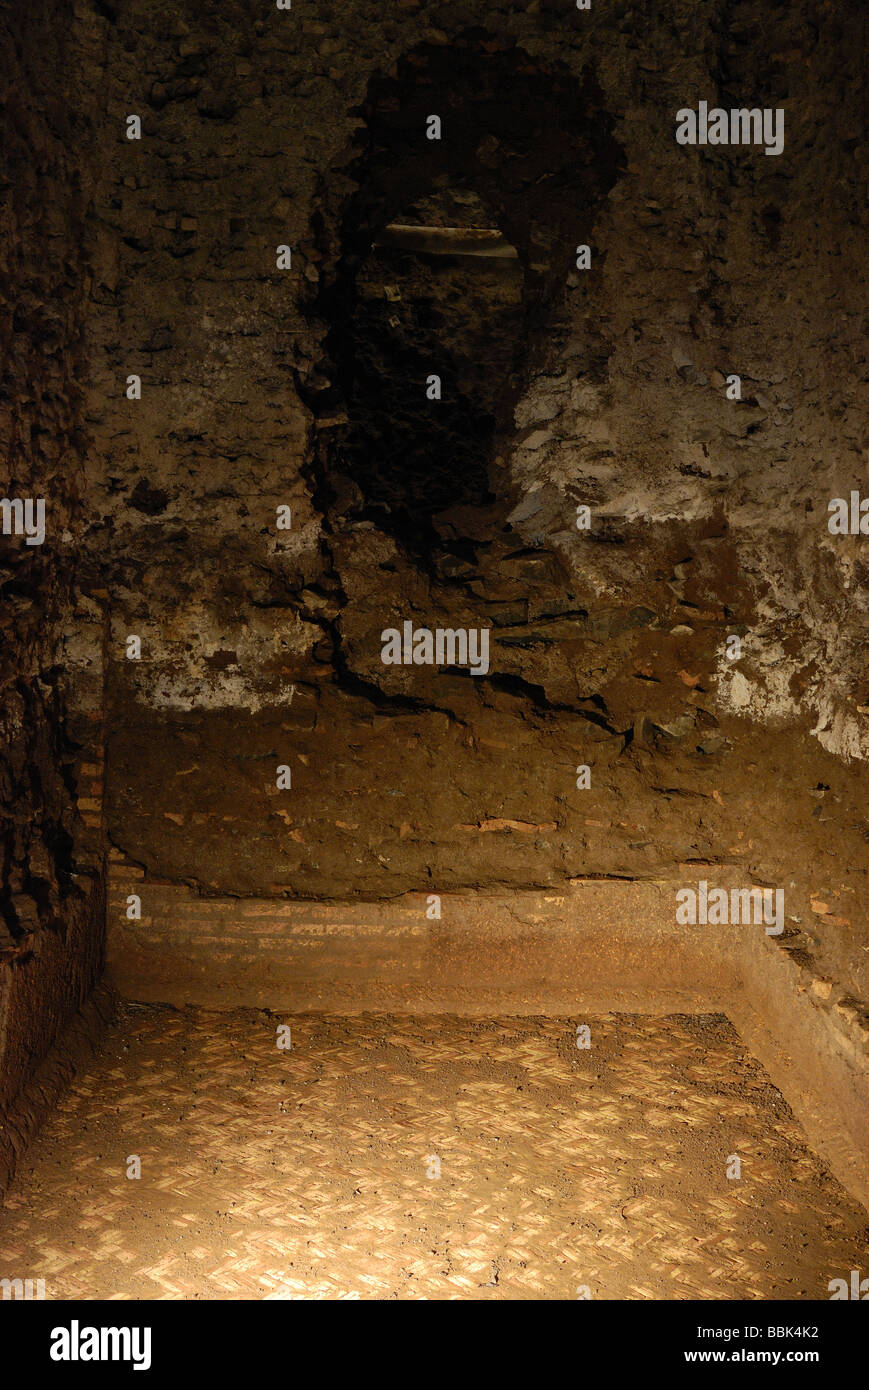 Vaulted rooms inside Barco Borghese archaeological site in Monte Porzio Catone (Rome, Italy). Stock Photo